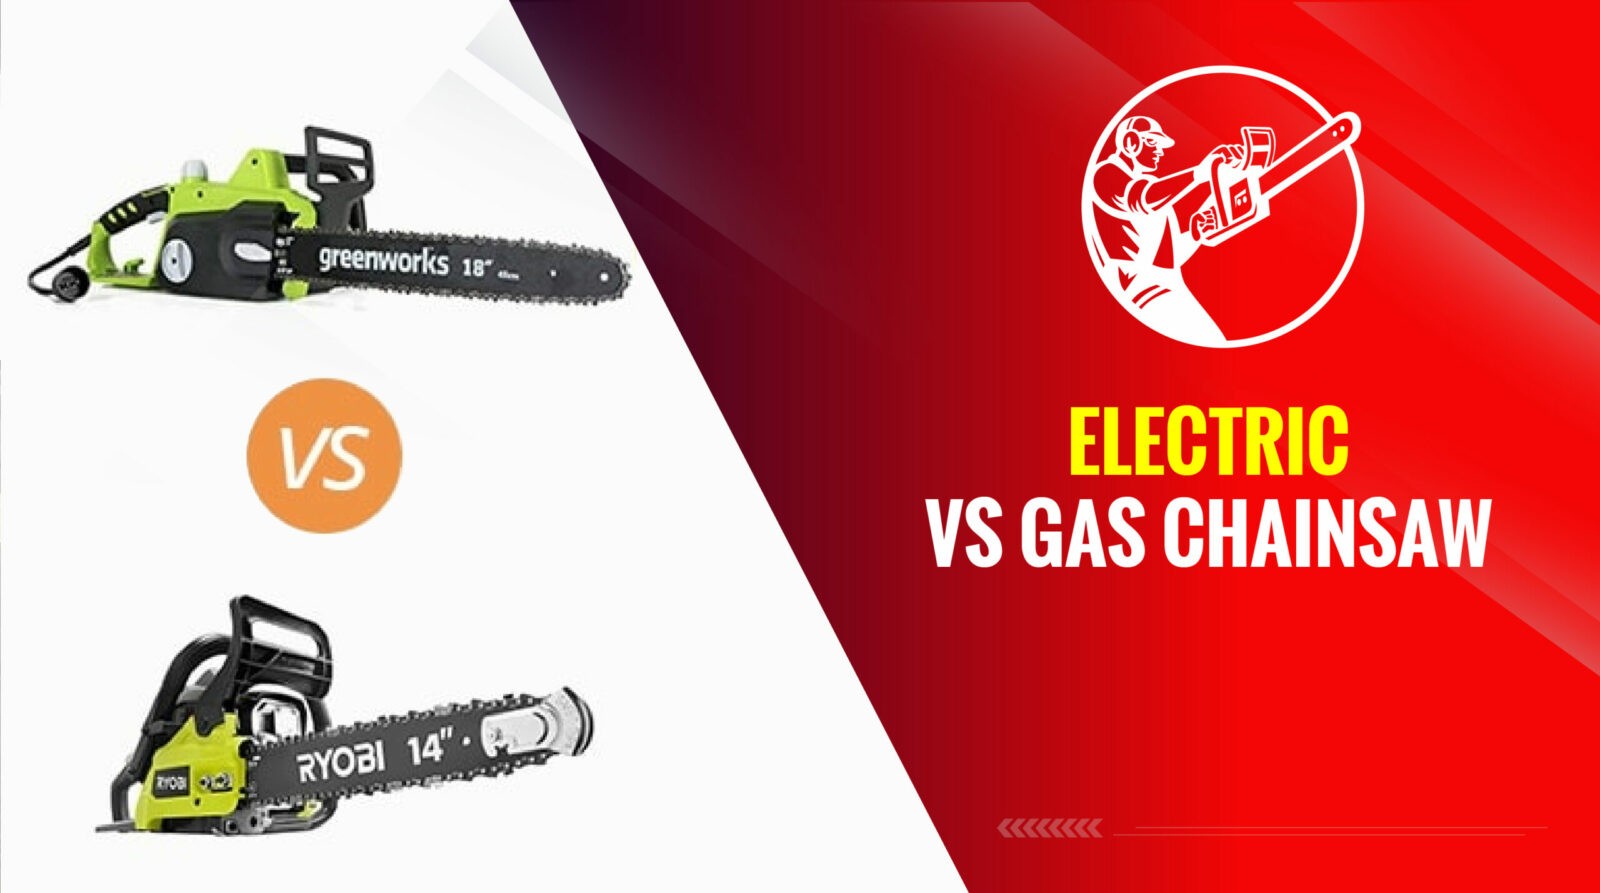 Electric vs Gas Chainsaw - Choose The Best One